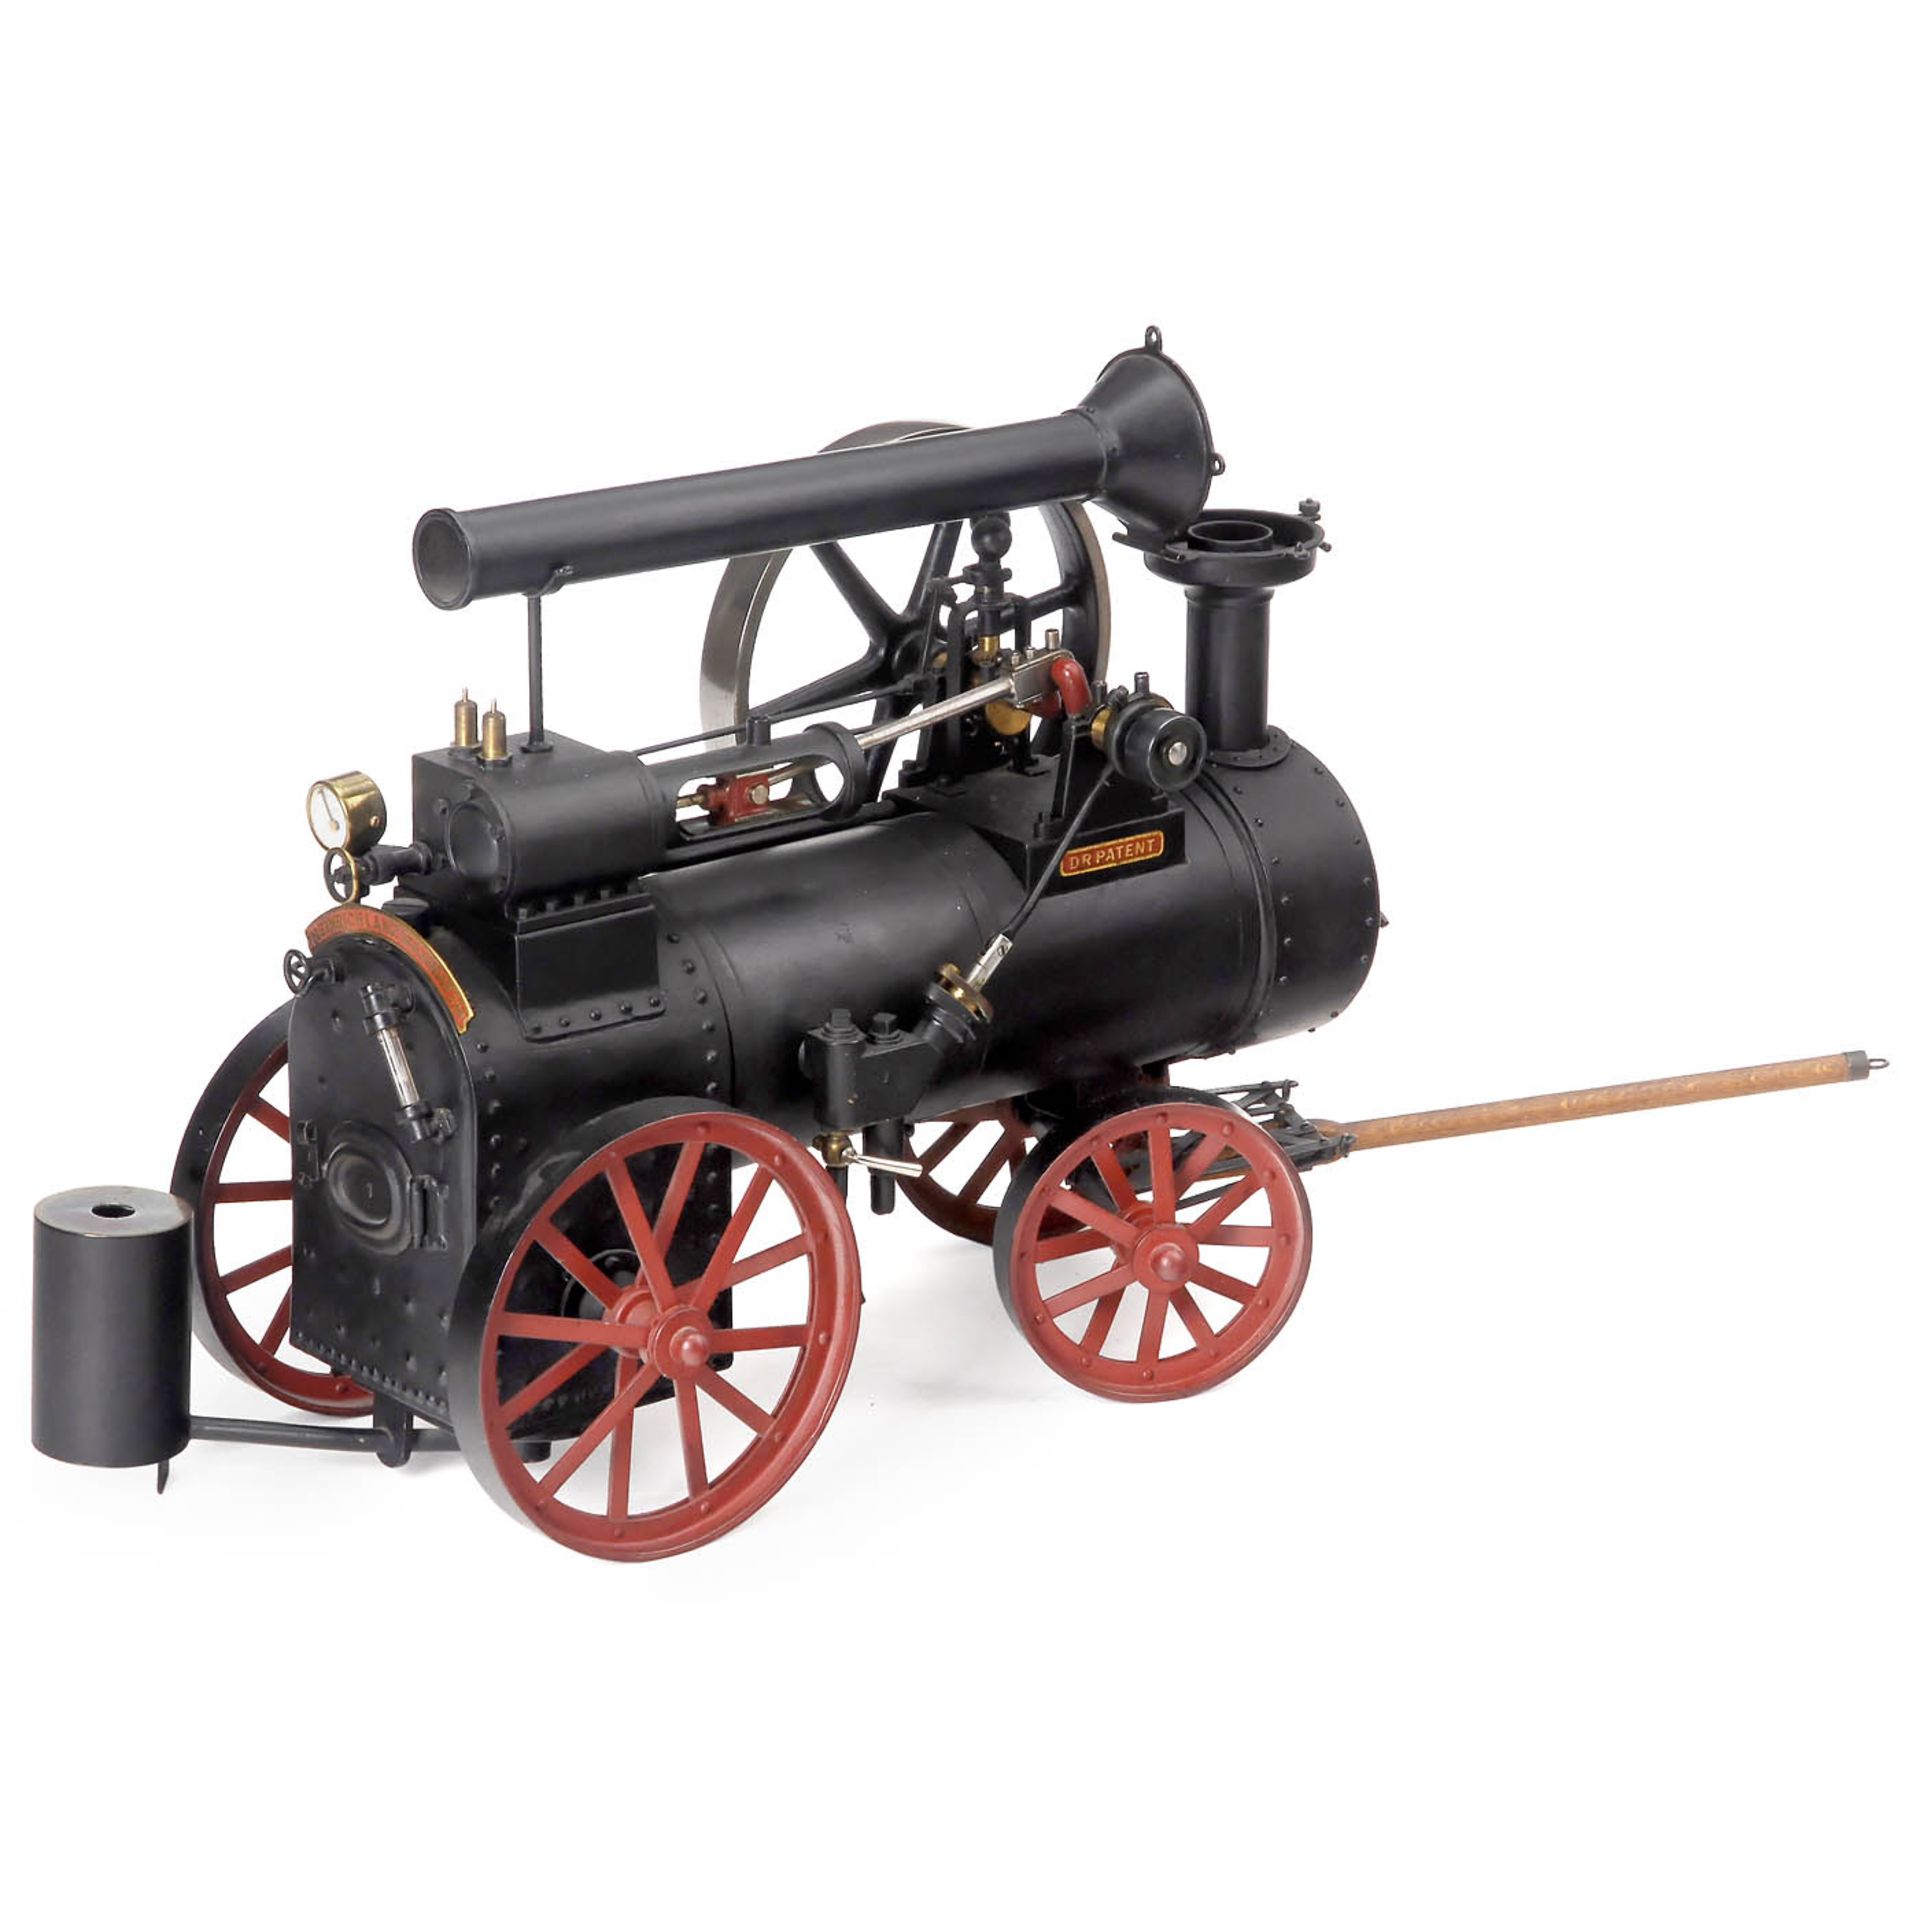 ¾-Inch Scale Model of a Horse-Drawn Portable Engine by Lanz, c. 1990 - Bild 3 aus 3